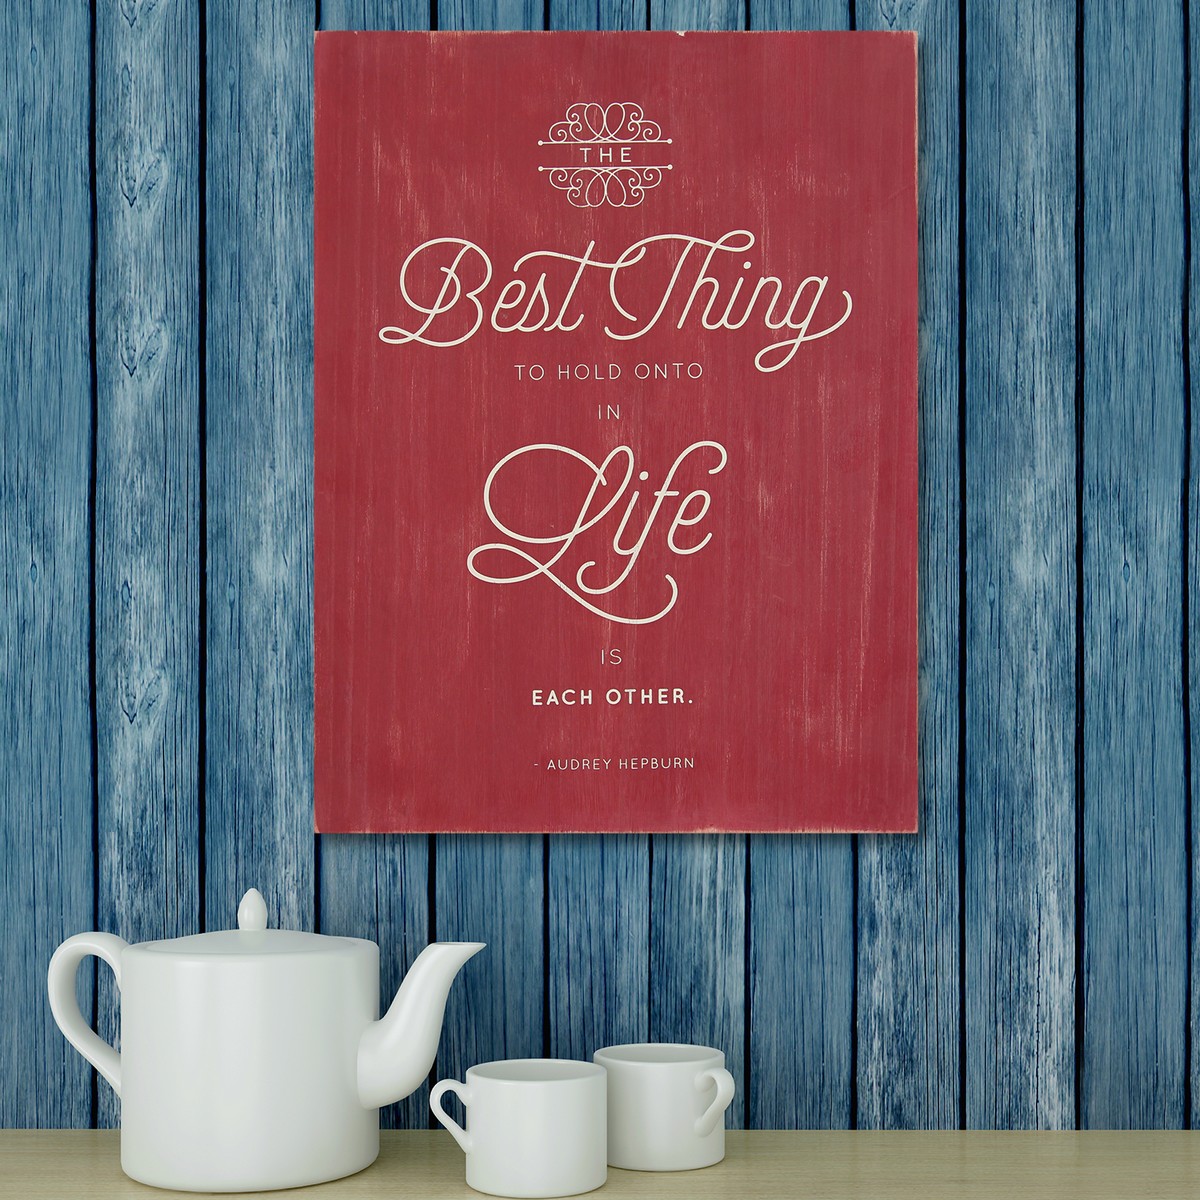 Stratton Home Decor Best Thing in Life Box Art - Red/White